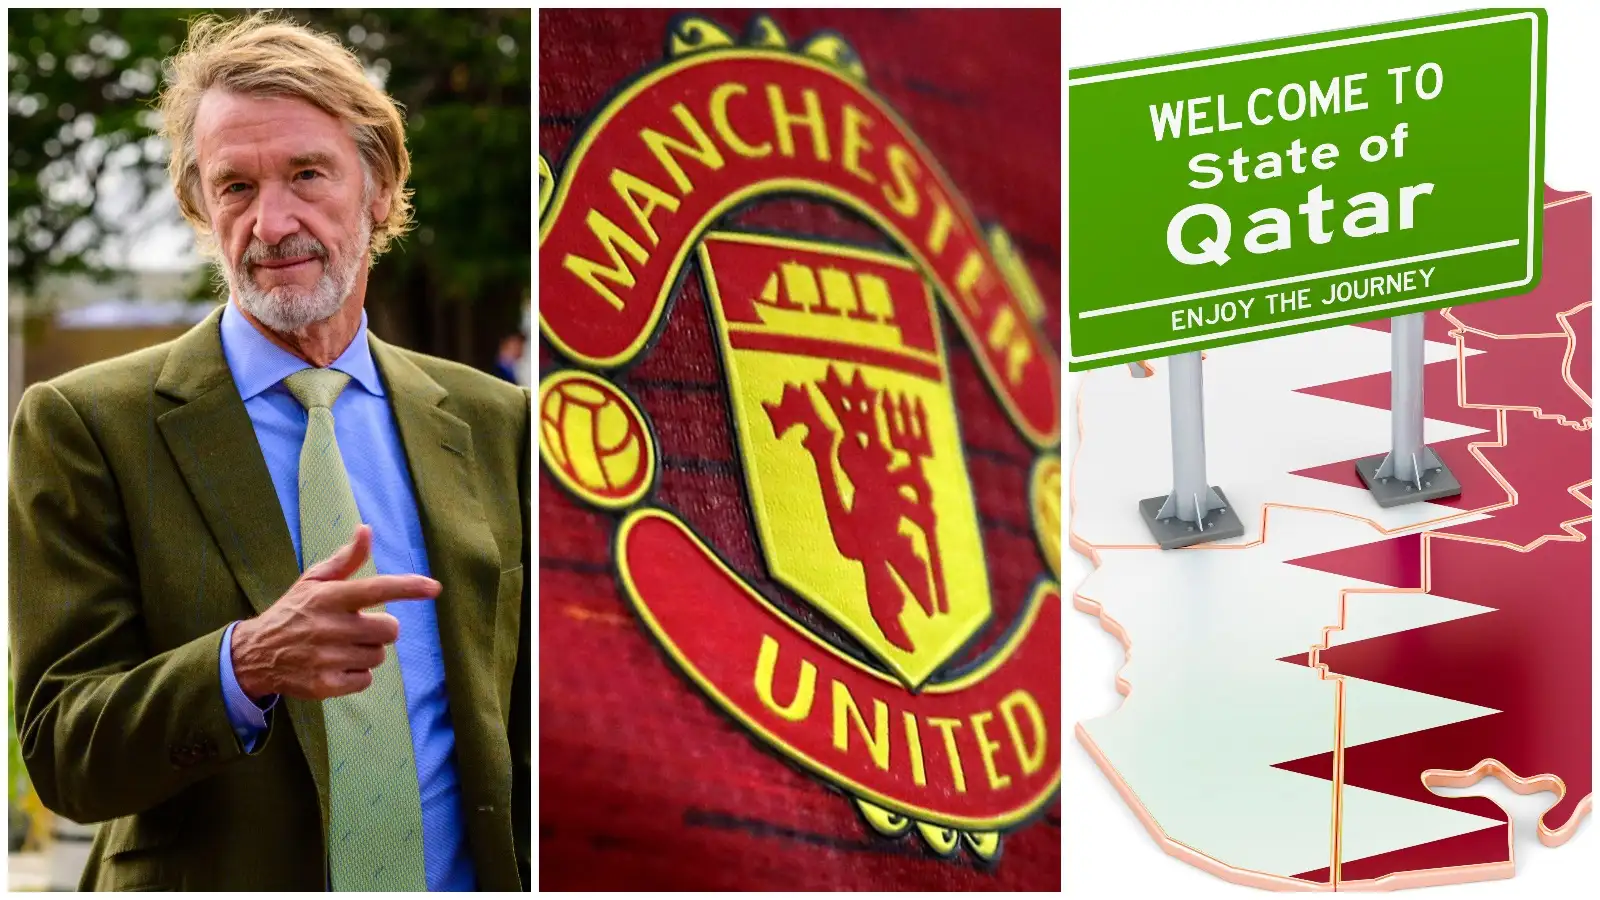 The Manchester United badge flanked by Sir Jim Ratcliffe and a 'Welcome to Qatar' sign.